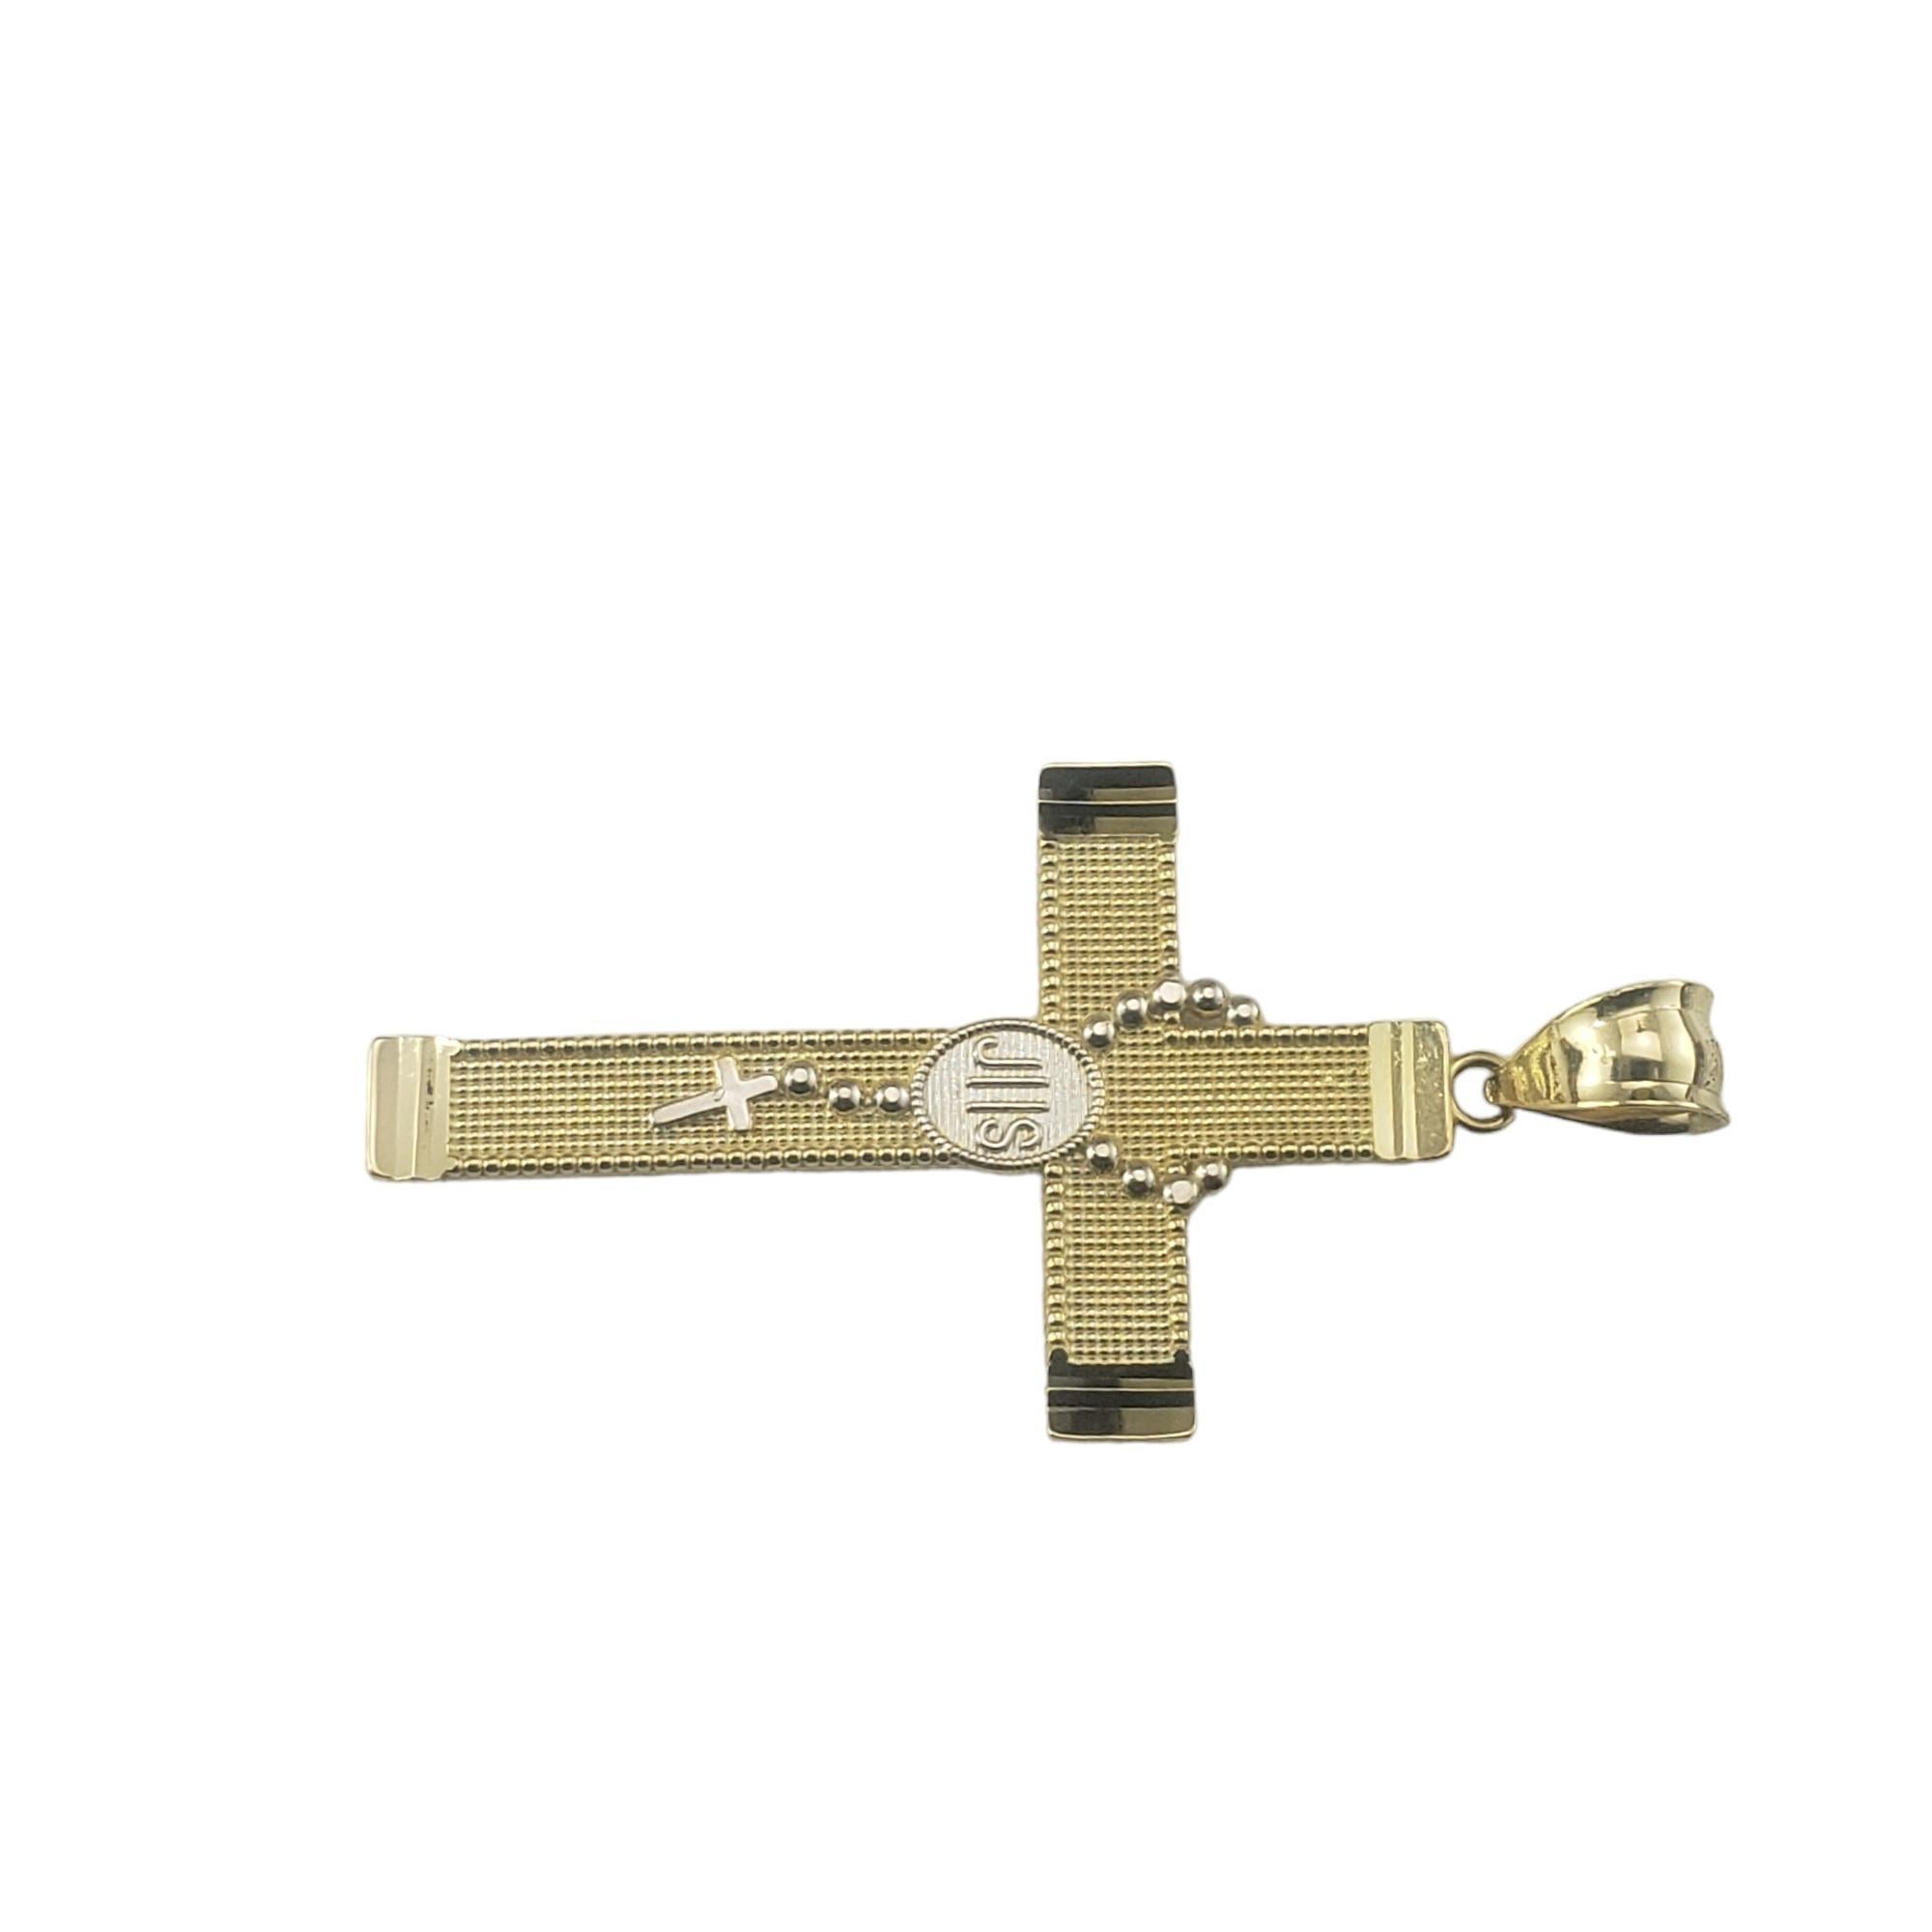 Vintage 14 Karat Yellow Gold Cross Pendant-

This stunning cross pendant with overlay of rosary beads is crafted in beautifully detailed 14K yellow gold.

Size: 40 mm x 25 mm

Stamped: 14K

Weight: 1.7 dwt./ 2.6 gr.

*Chain not included.

Very good